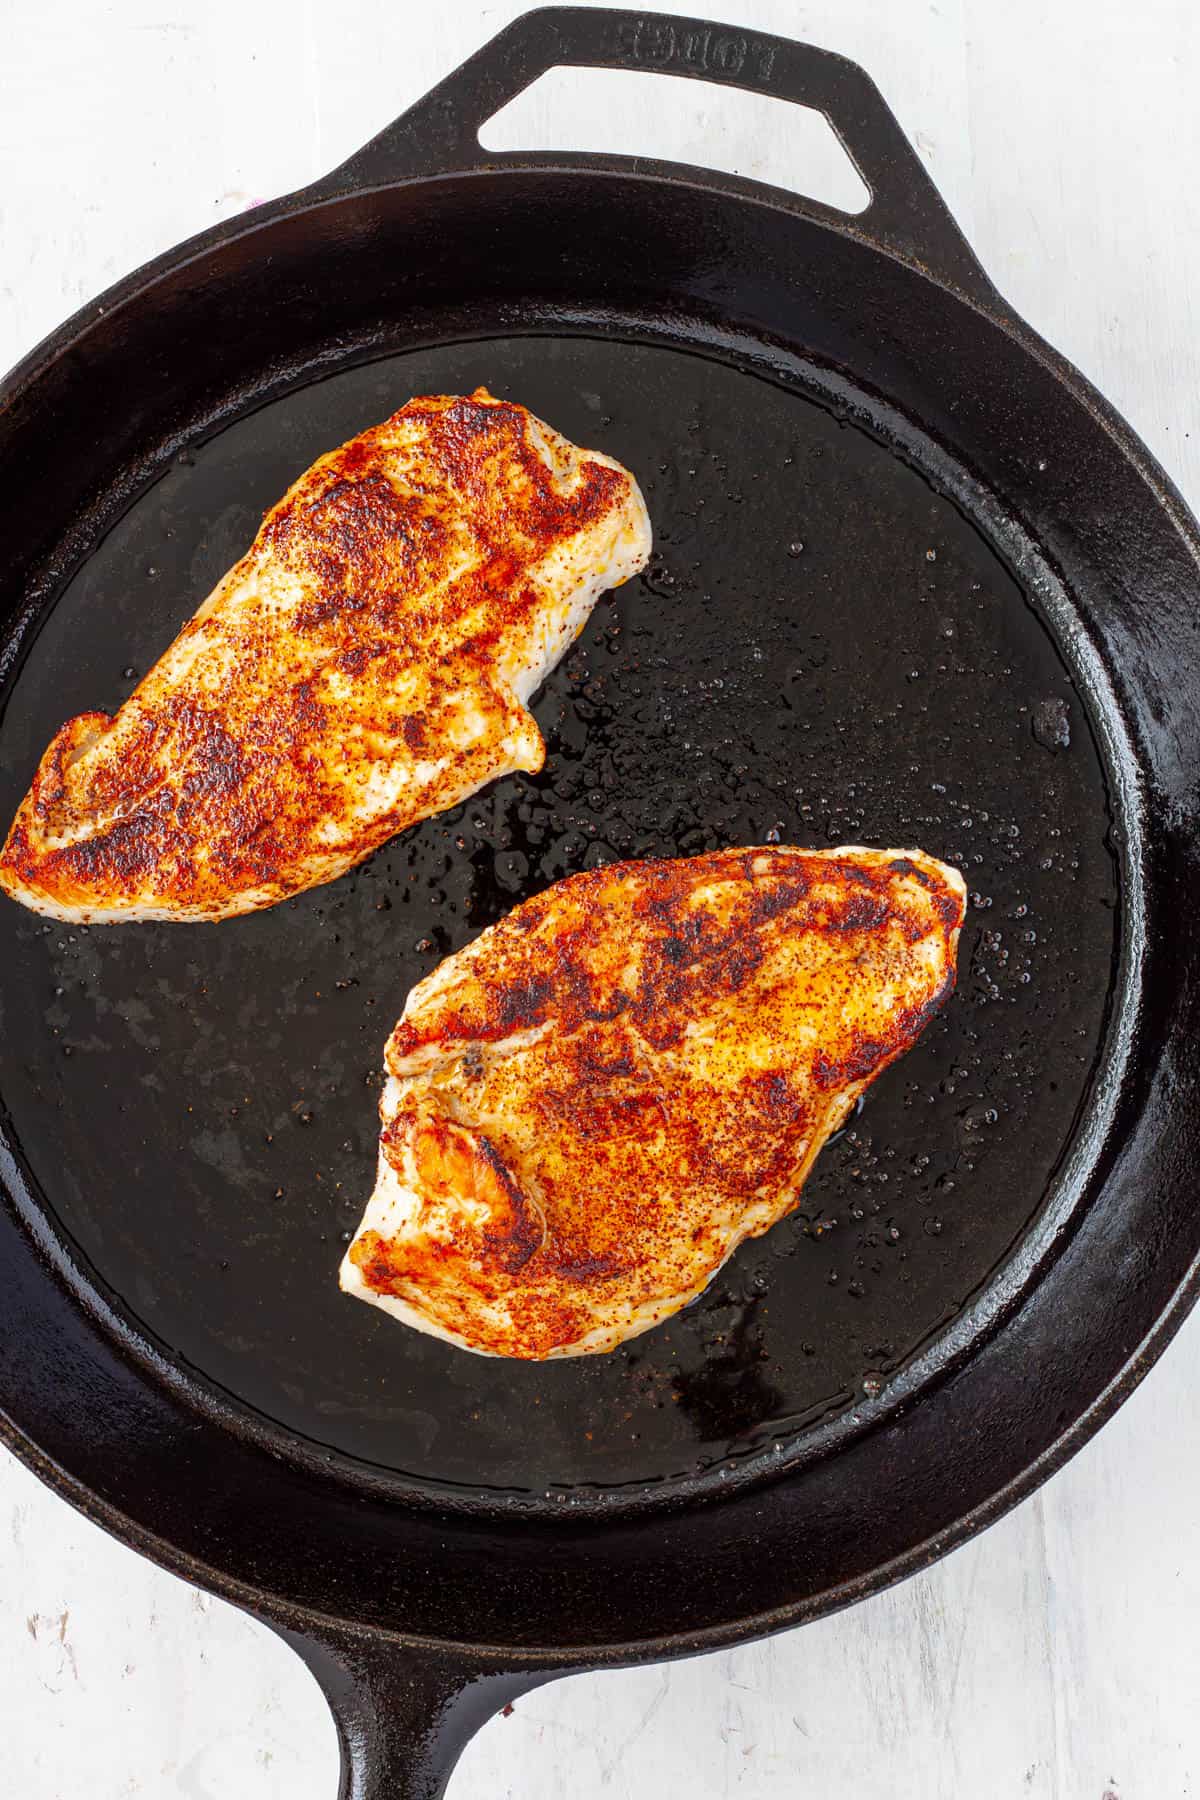 Chicken breasts seared in a cast iron skillet.